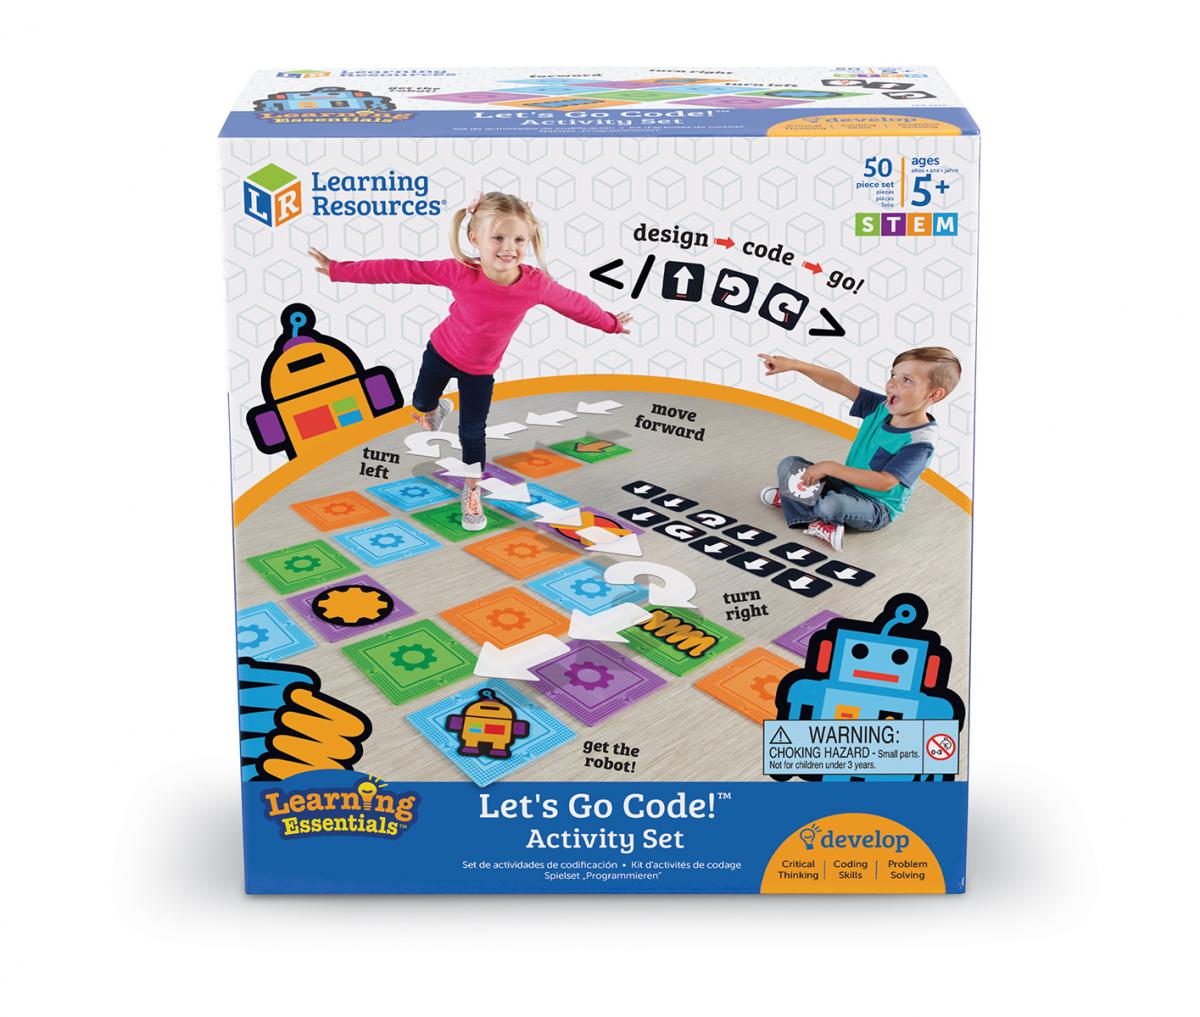 Learning Resources - Botley the Coding Robot Costume Party Kit